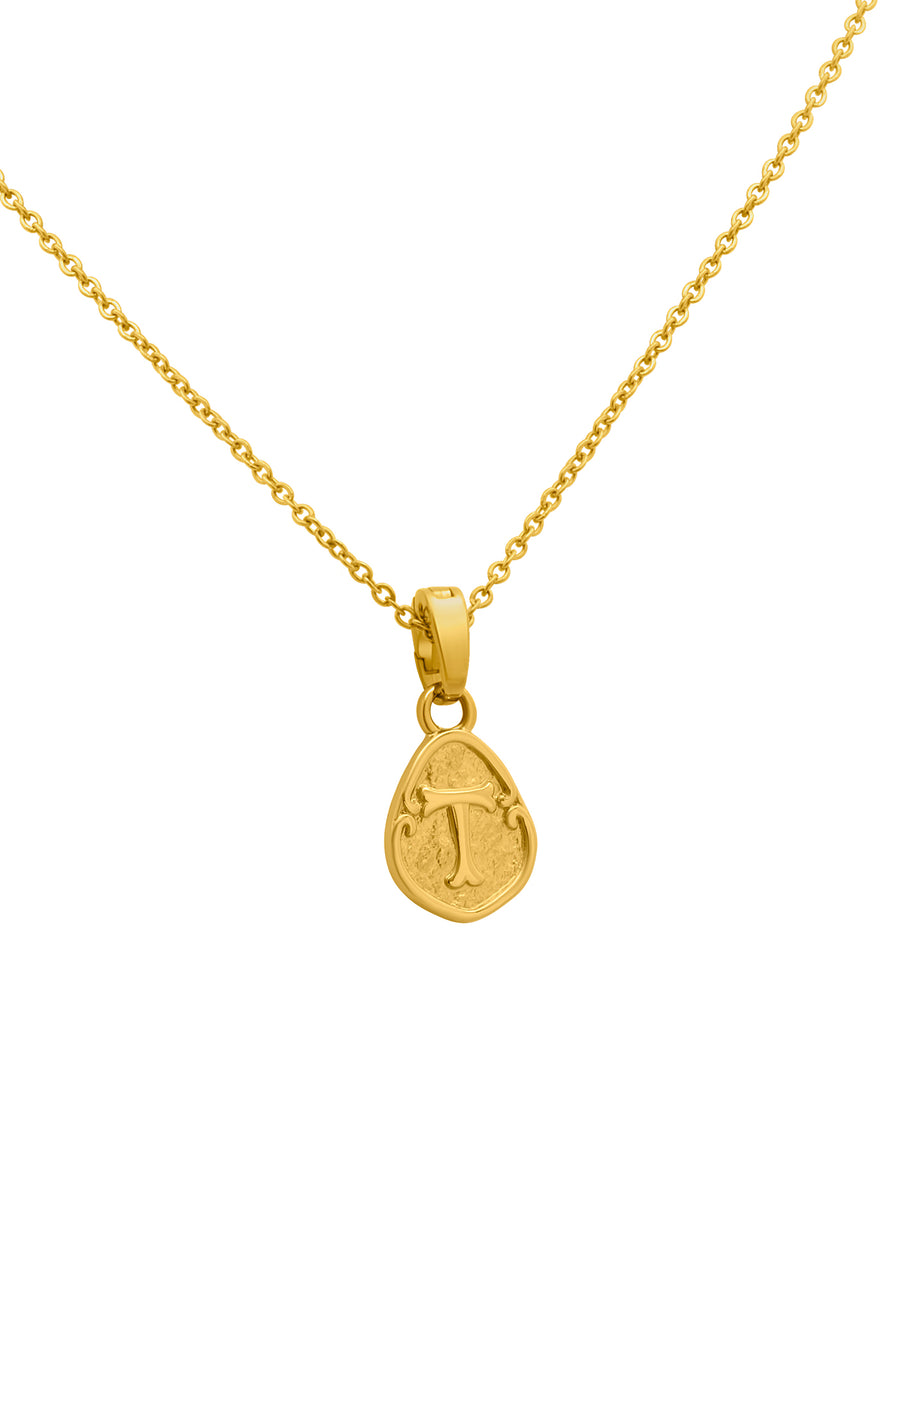 "T" Tberfil Letter Pendant with Petite Adjustable Chain Necklace